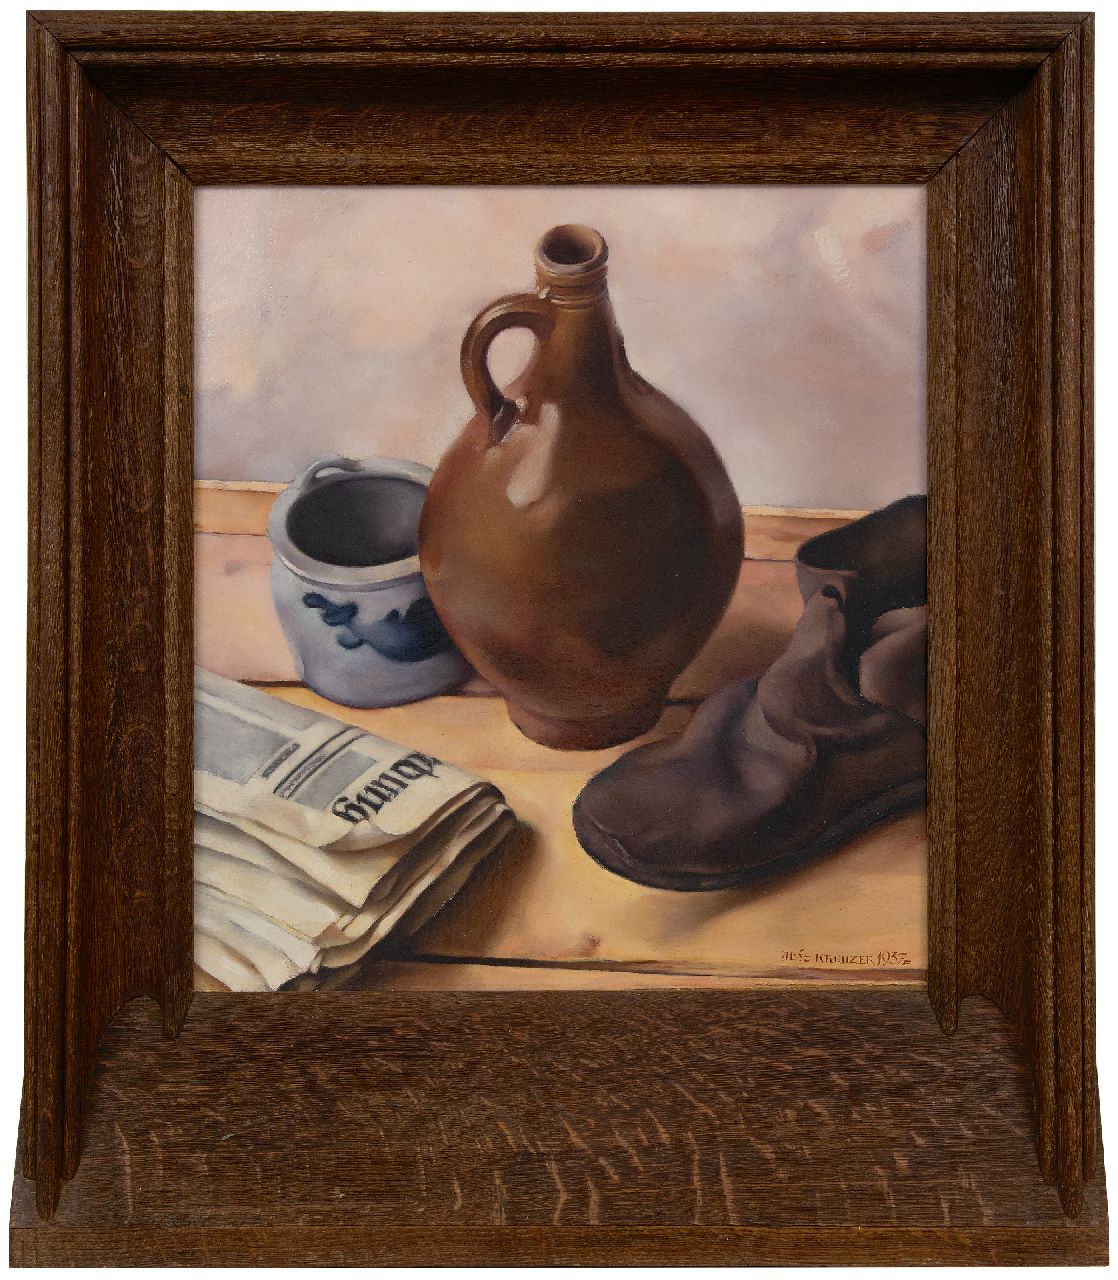 Kreuzer A.J.  | Aloys Johann Kreuzer | Paintings offered for sale | Stilllife with jug, newspaper and a shoe, oil on canvas laid down on board 49.6 x 45.8 cm, signed l.r. and dated 1937